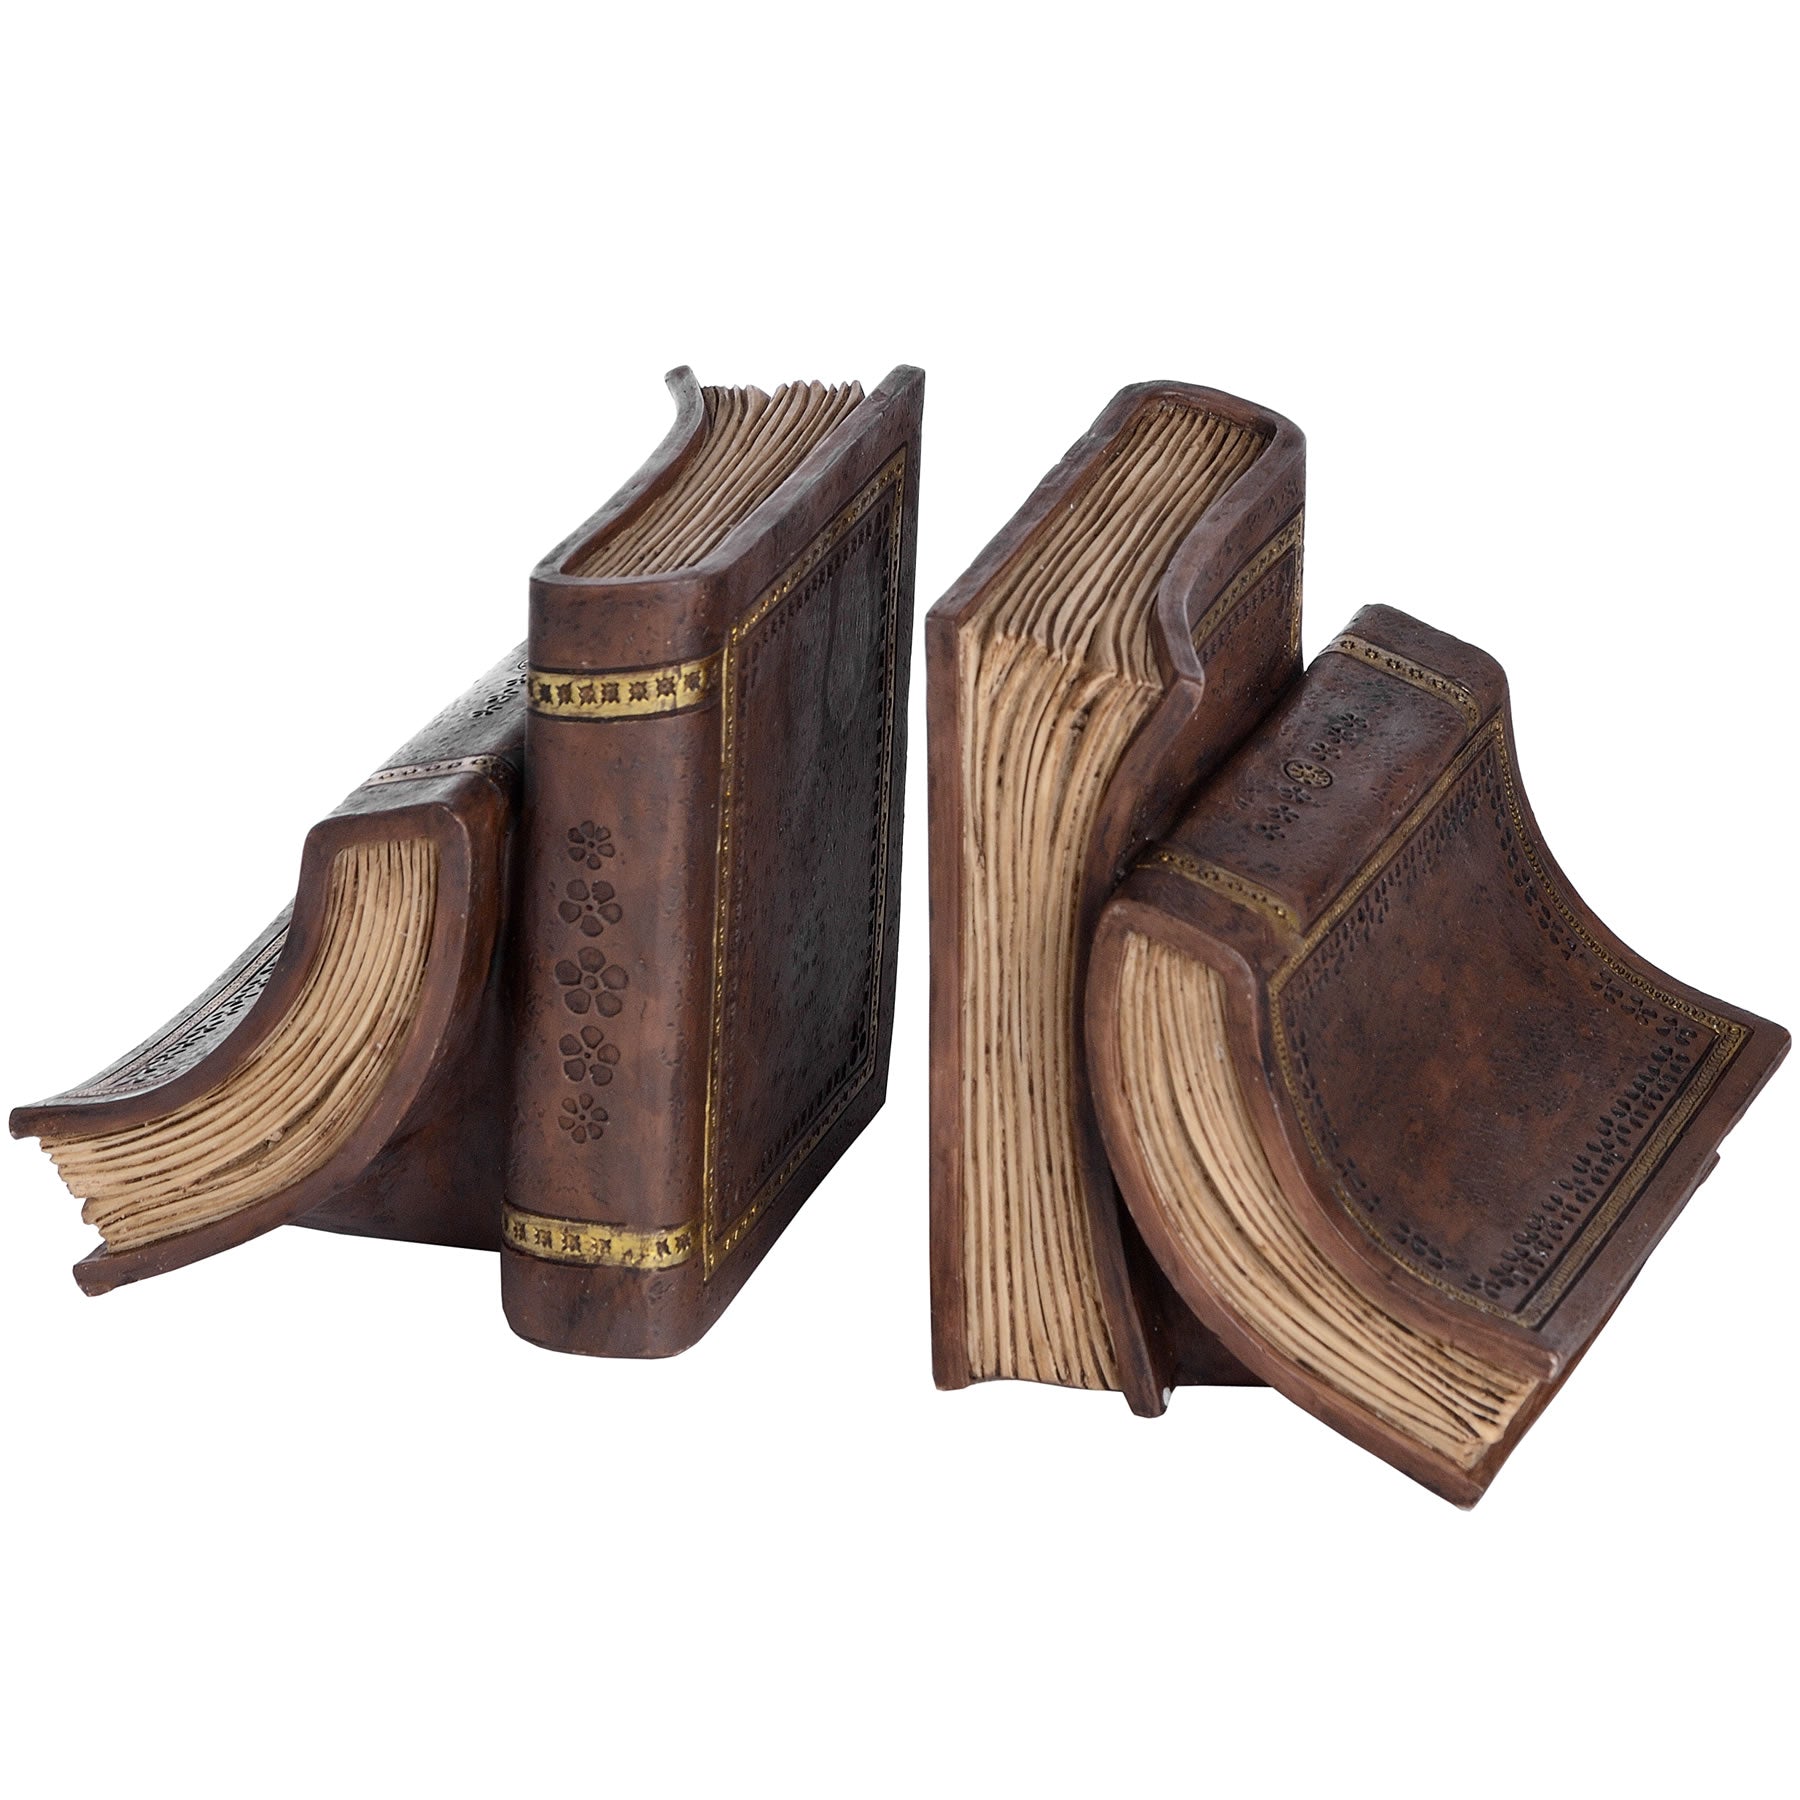 Pair of Old Books Bookends-product